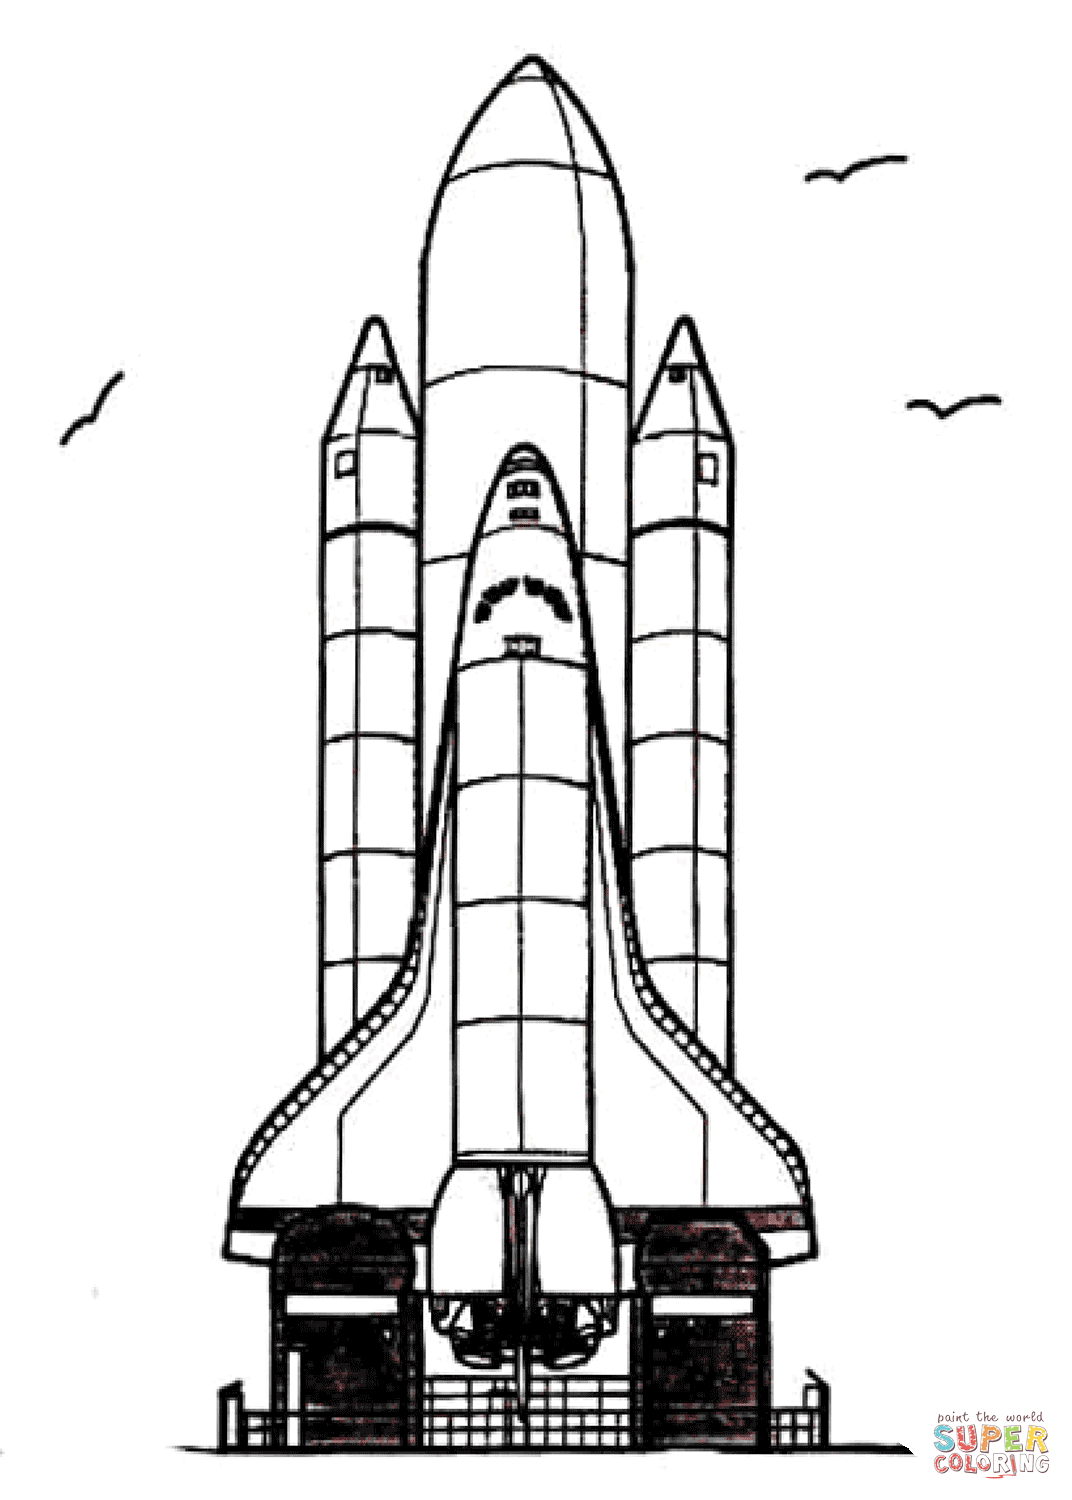 Space shuttle is ready for iftoff